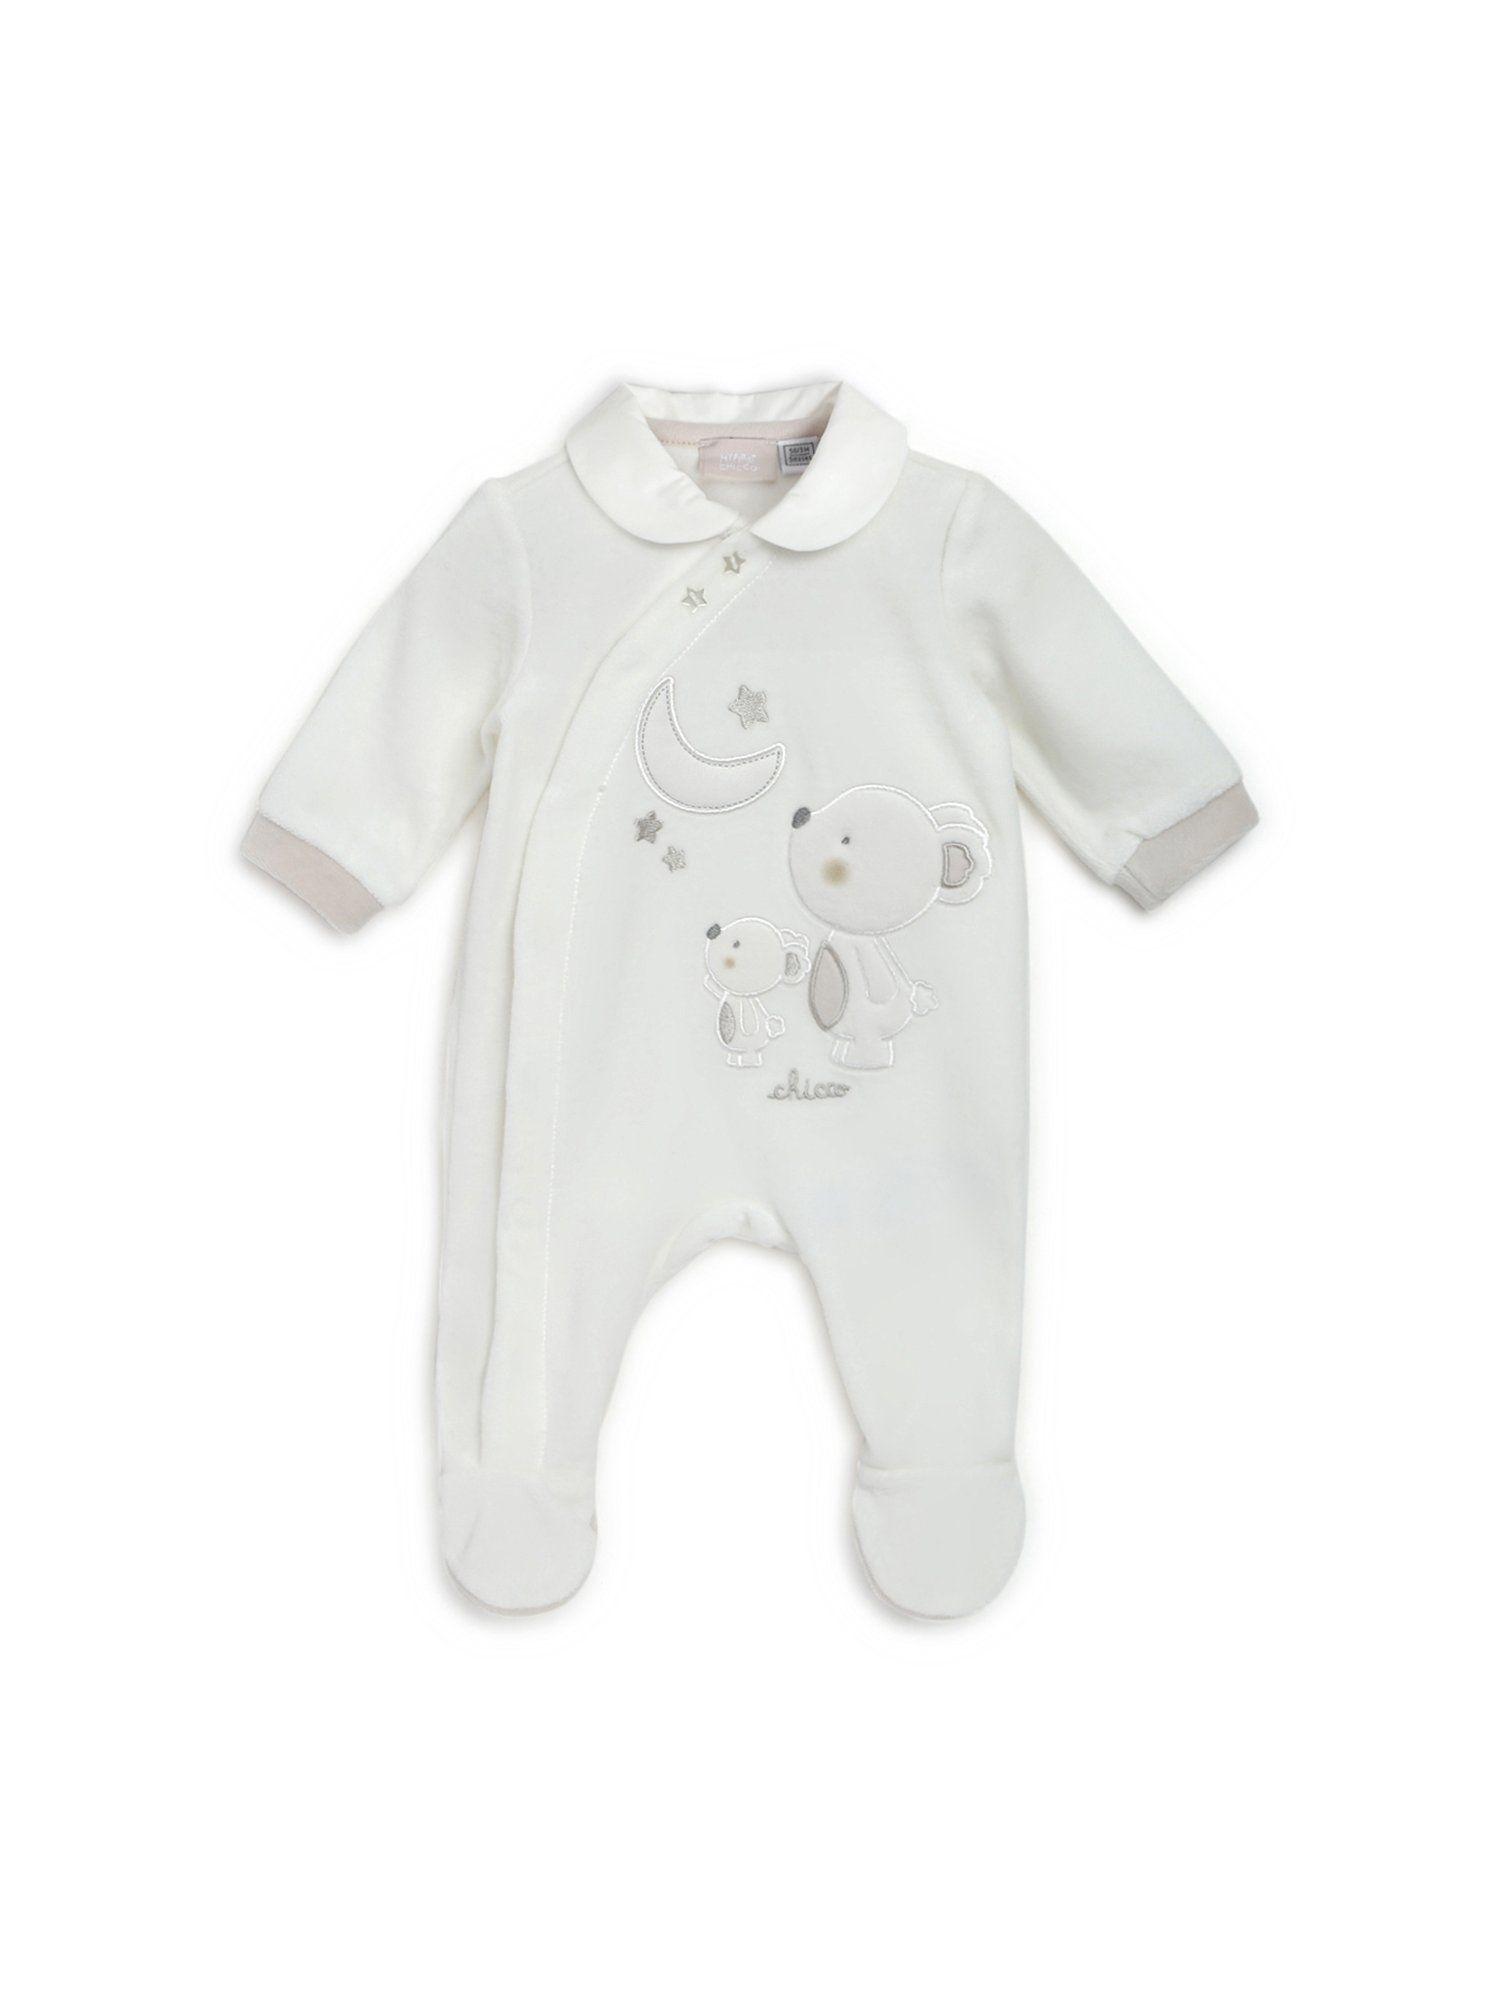 unisex white front opening rompers